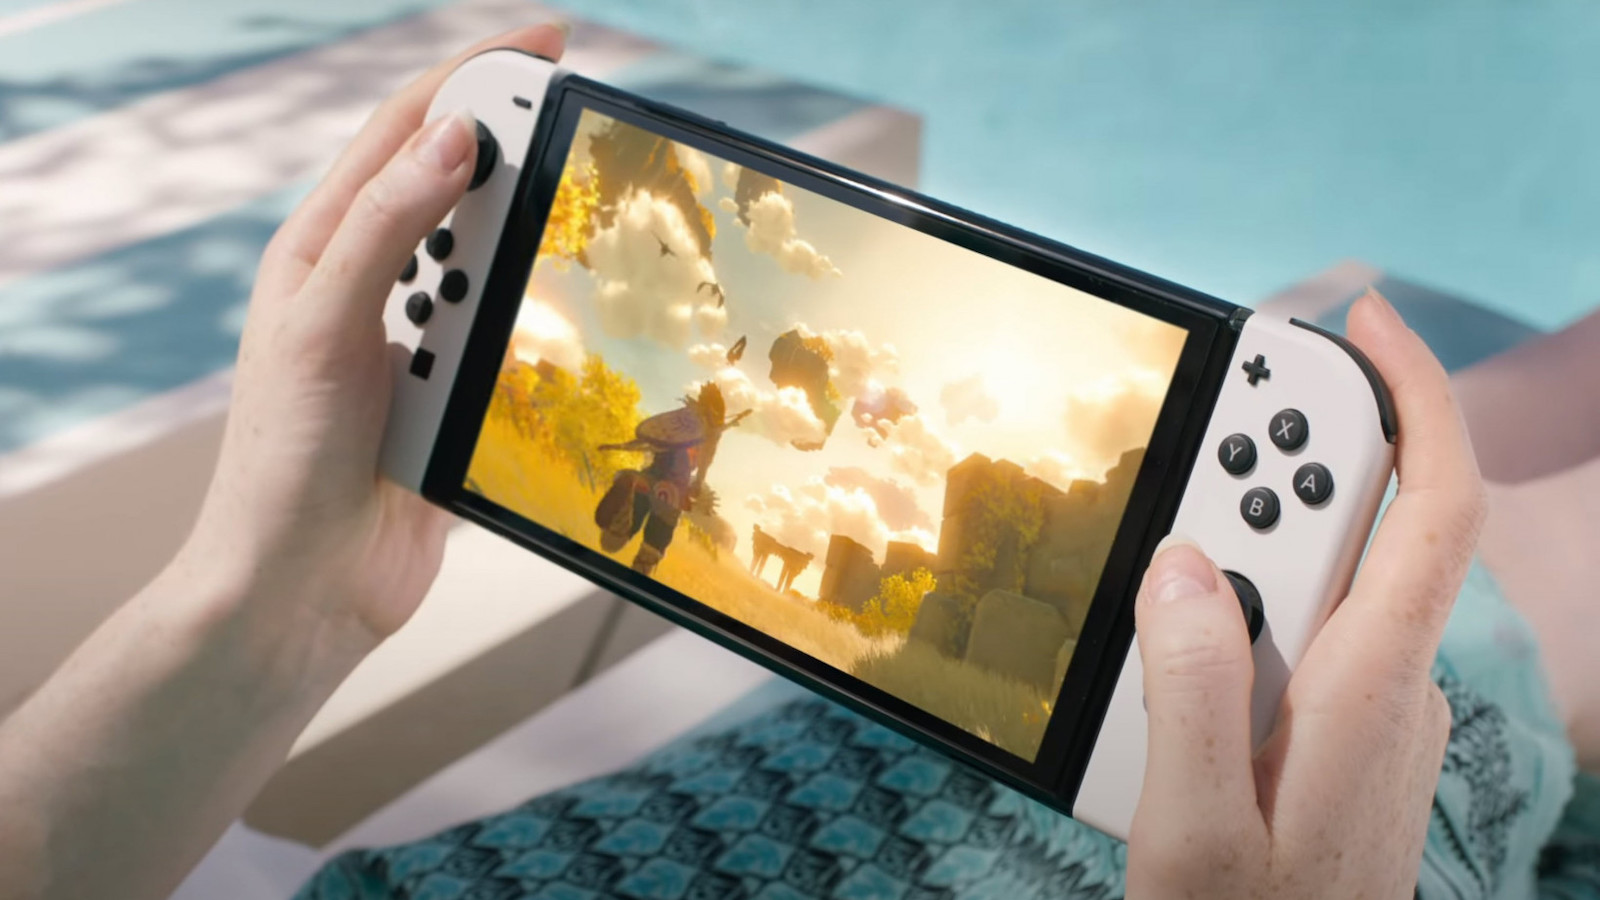 Nintendo Switch OLED: Cheapest prices in Australia